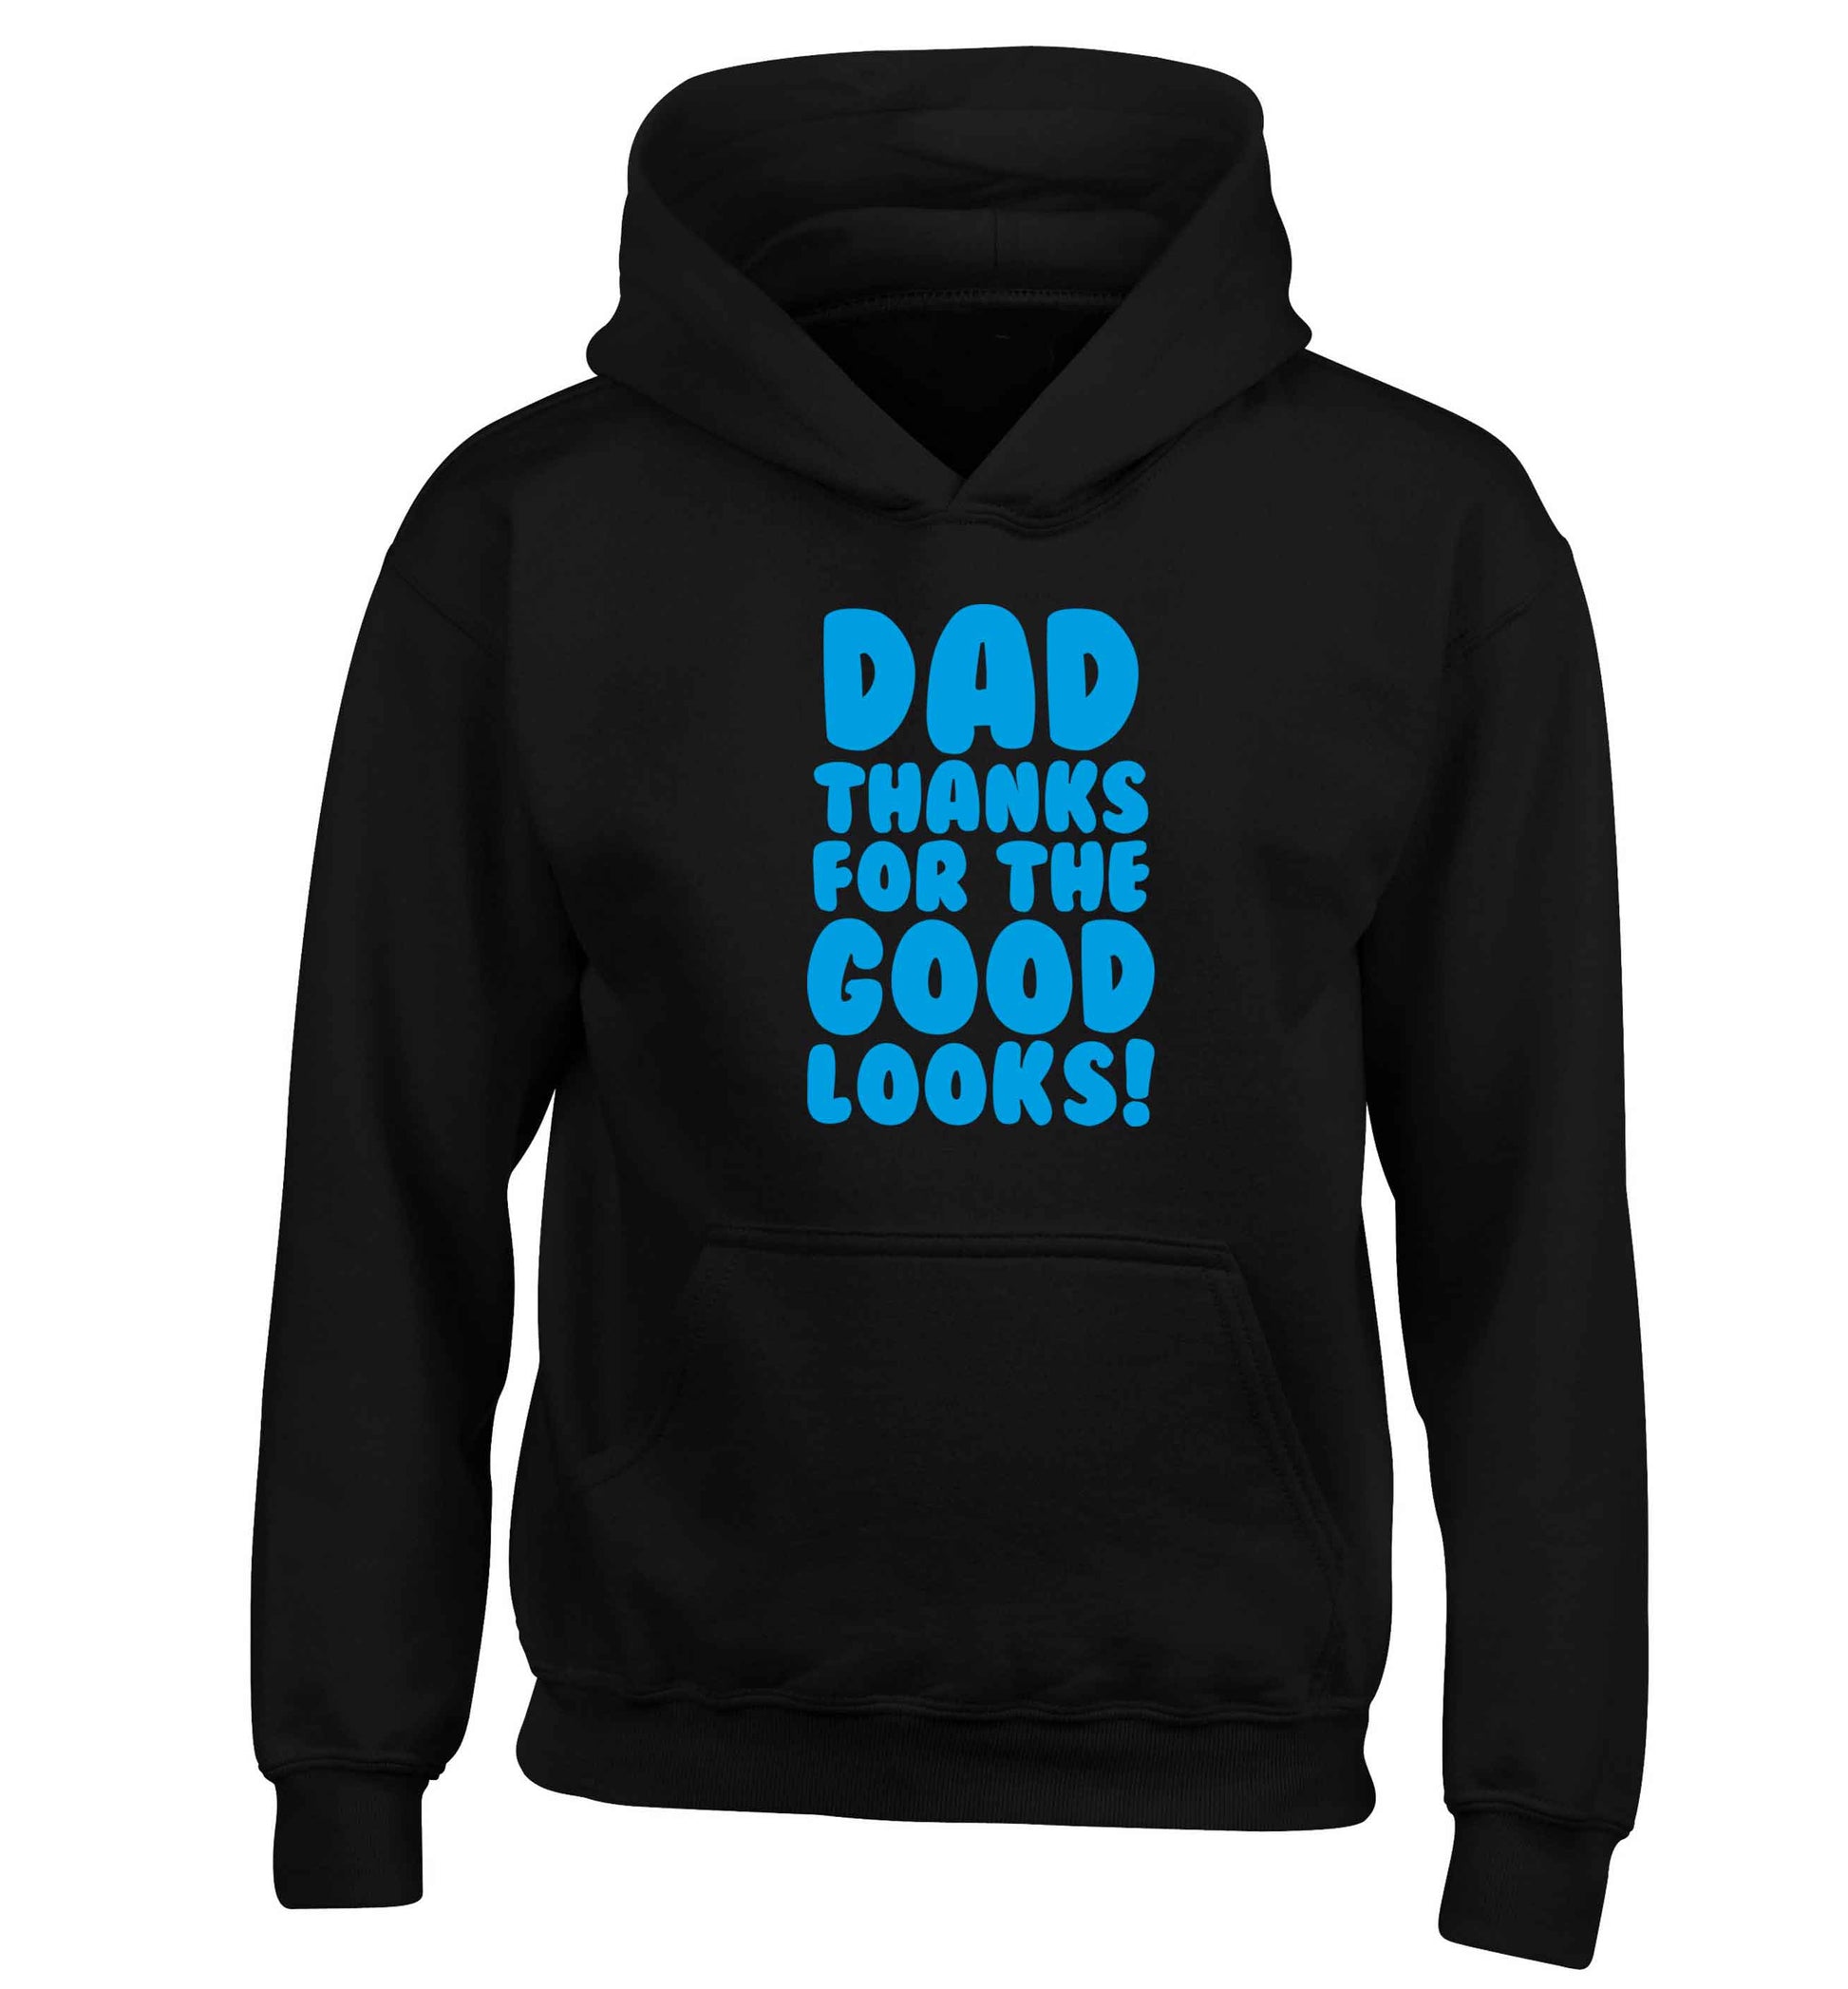 Dad thanks for the good looks children's black hoodie 12-13 Years